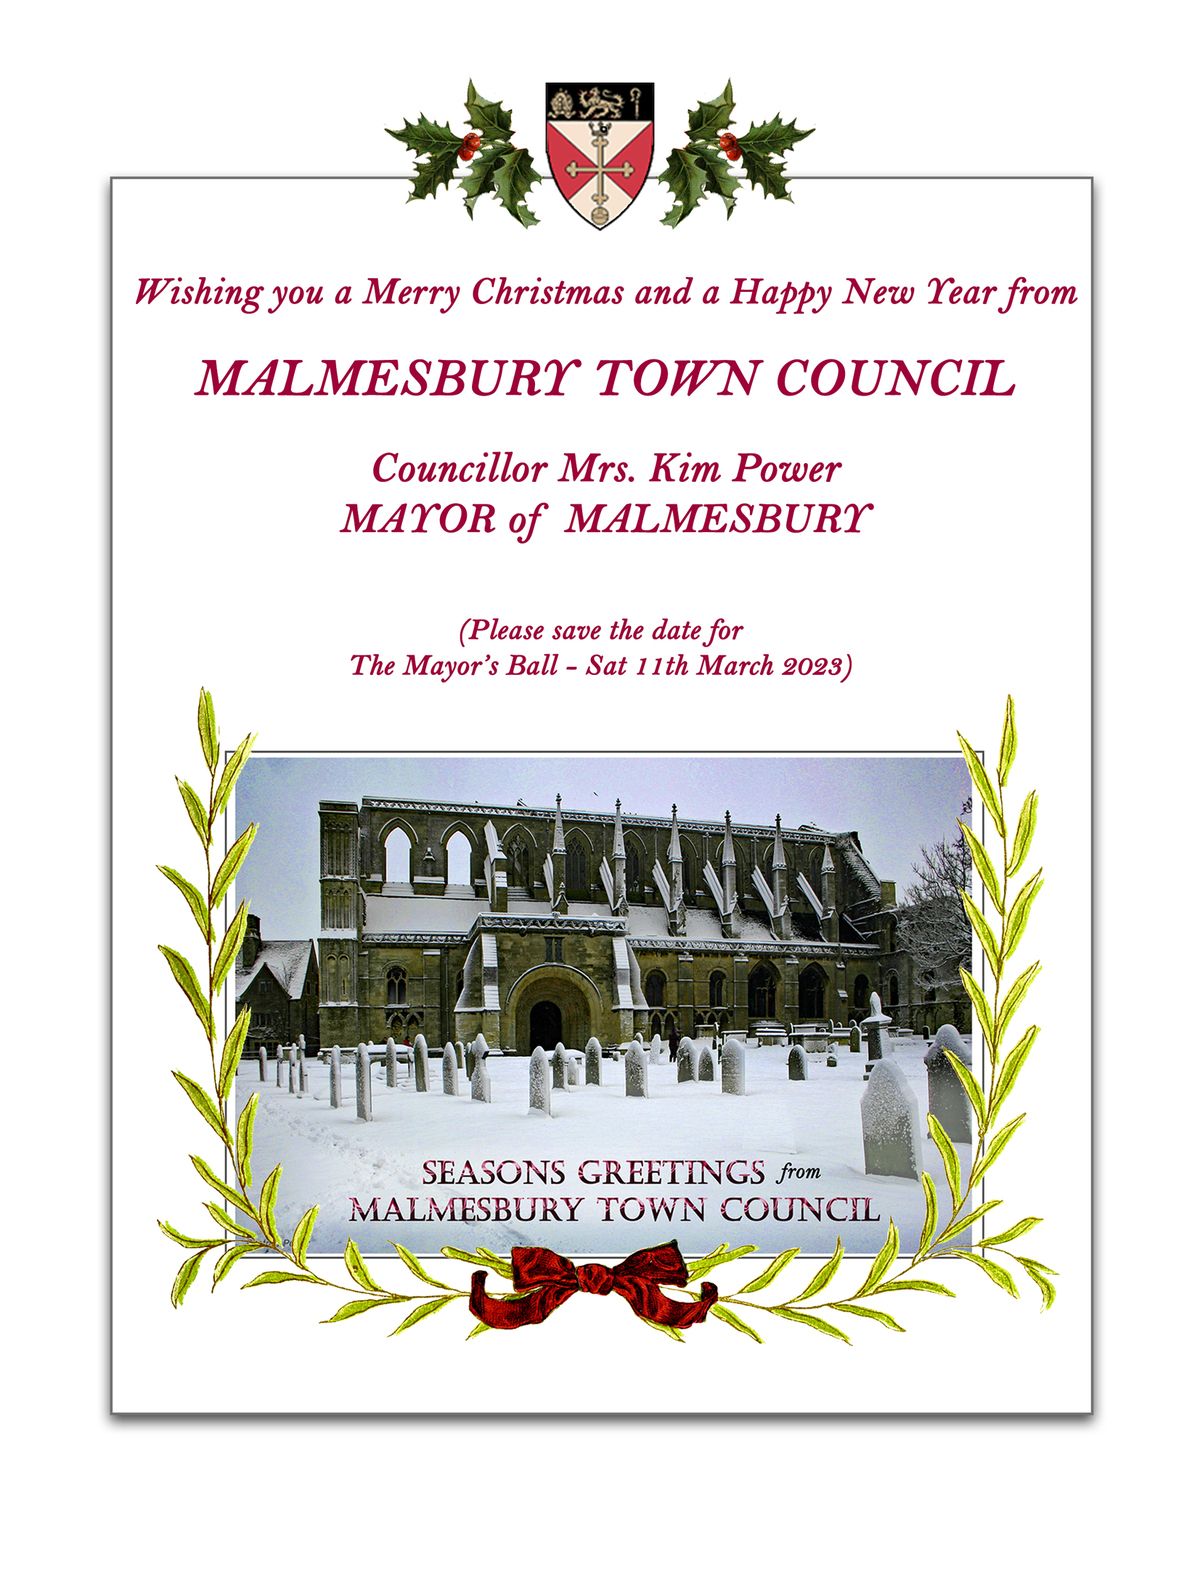 Christmas Wishes from the Mayor and Malmesbury Town Council